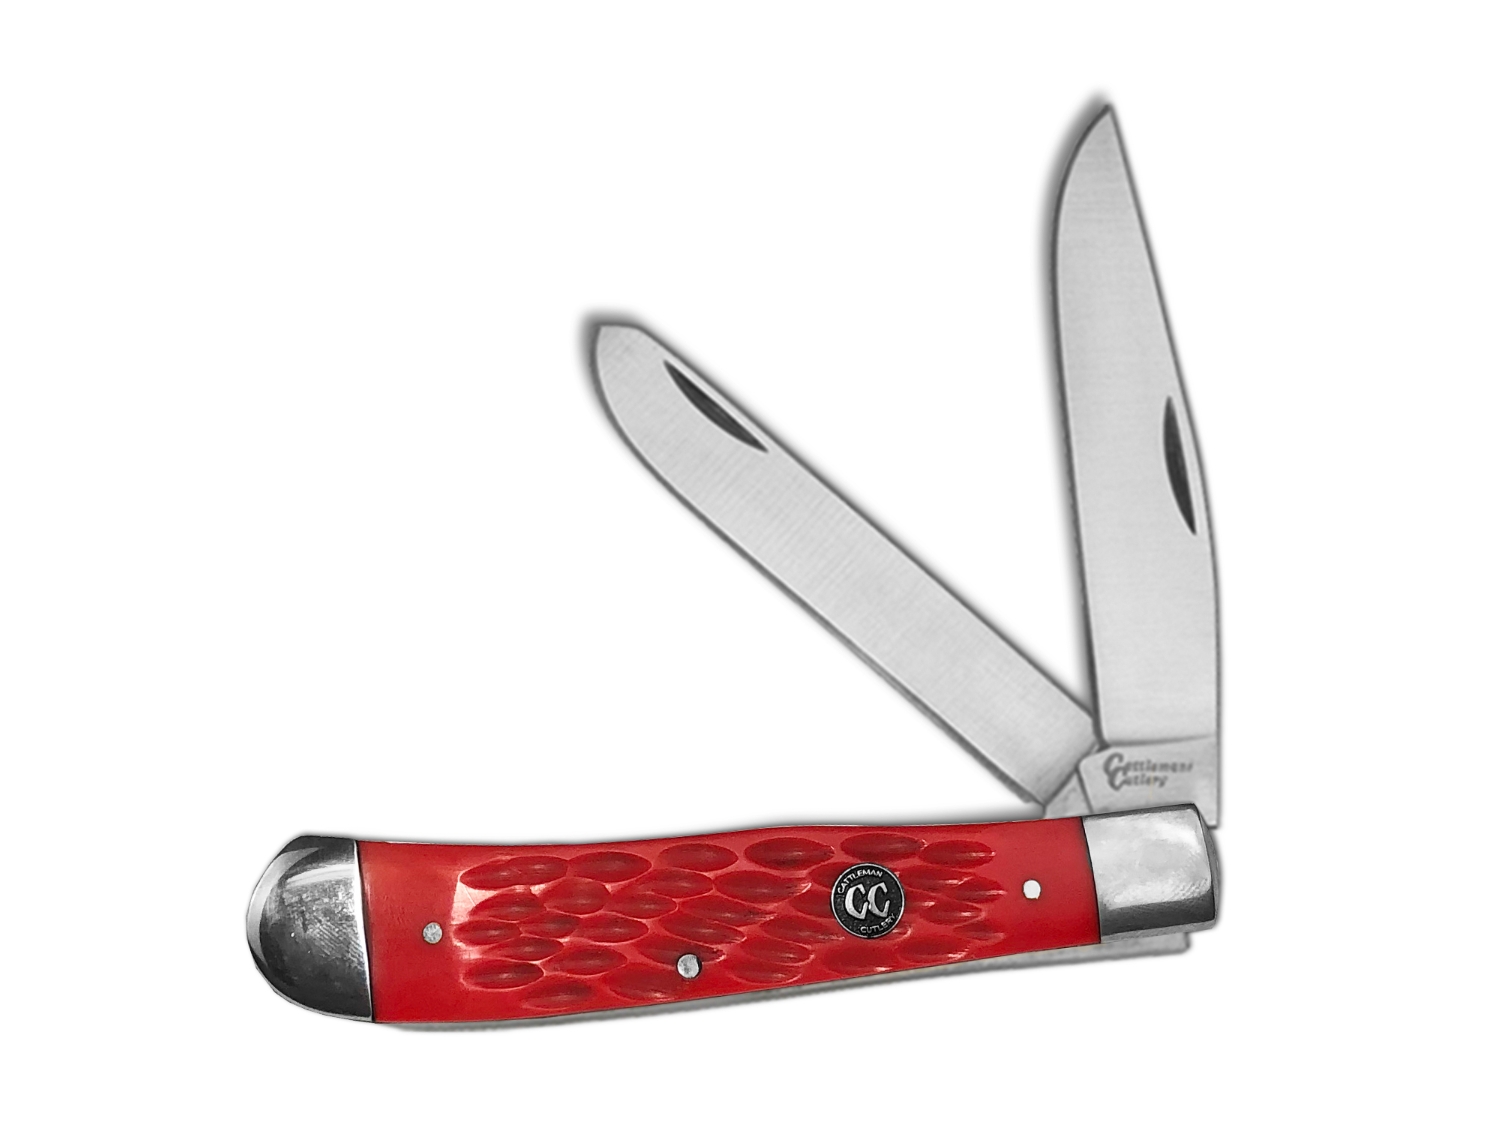 ABKT CC Series Trapper, Red